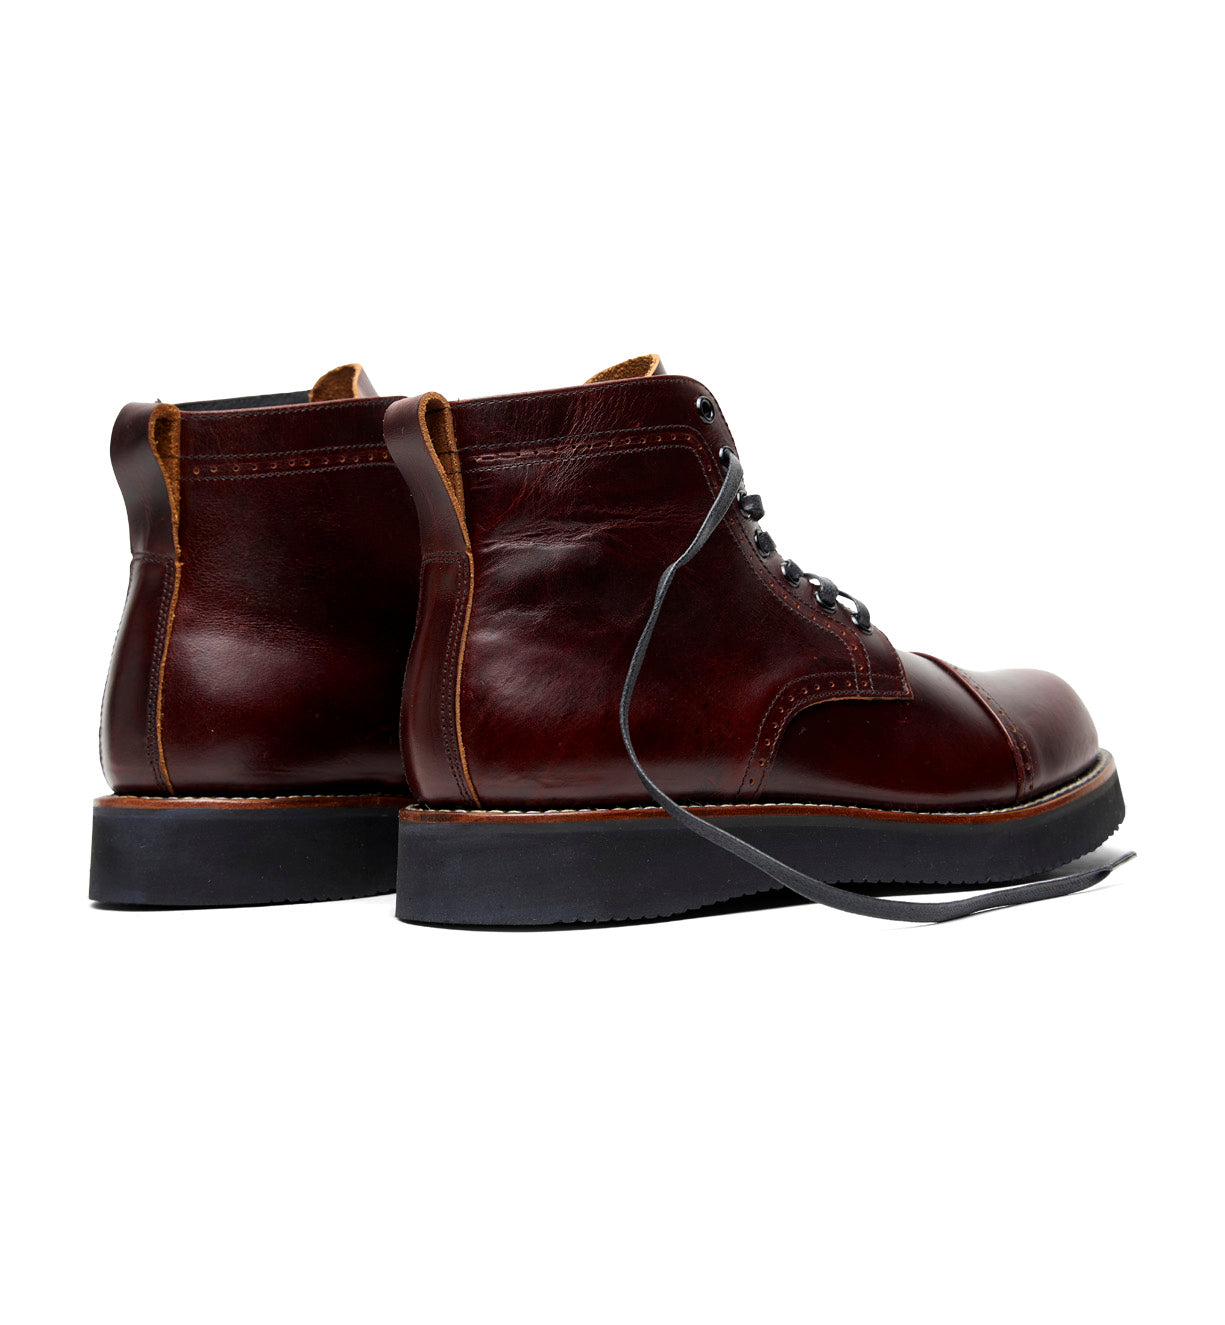 The Broken Homme Aaron Boot in burgundy leather features a classic cap toe silhouette.